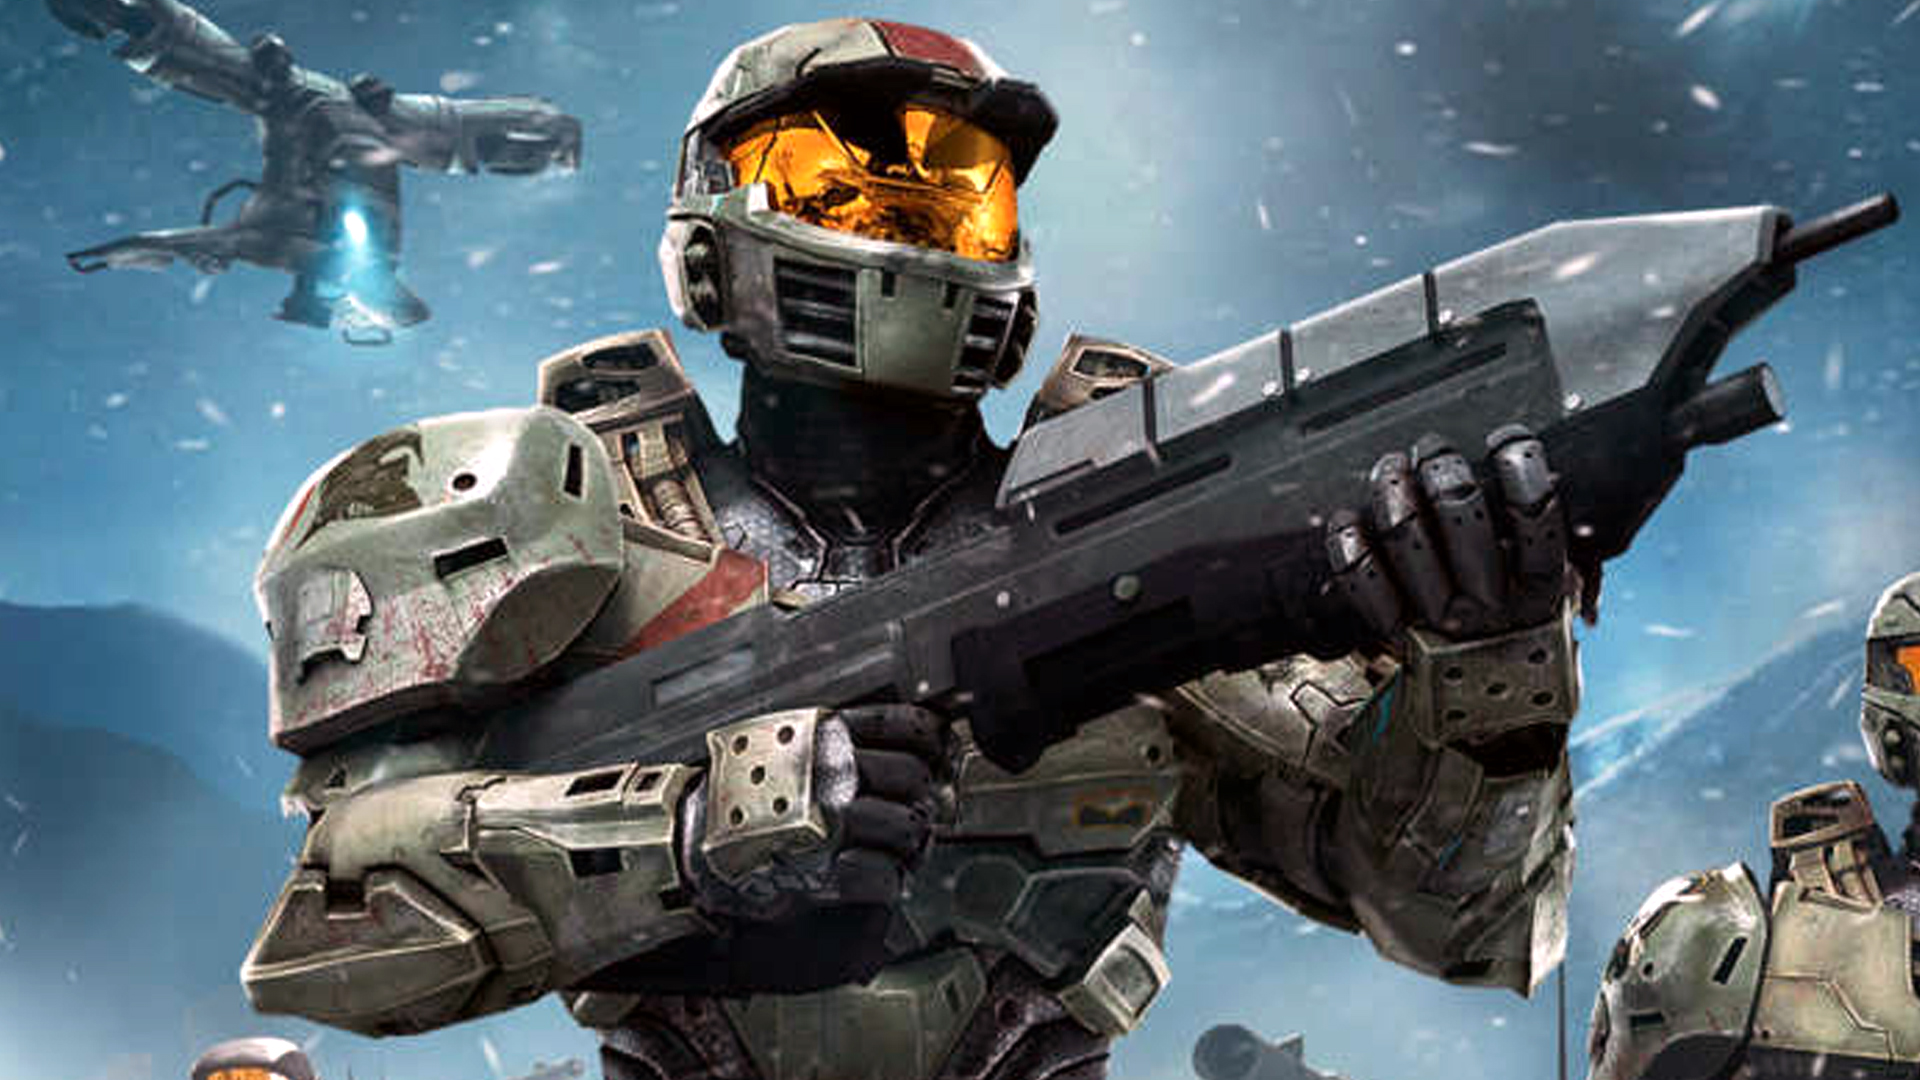 Halo: Master Chief Collection might get microtransactions